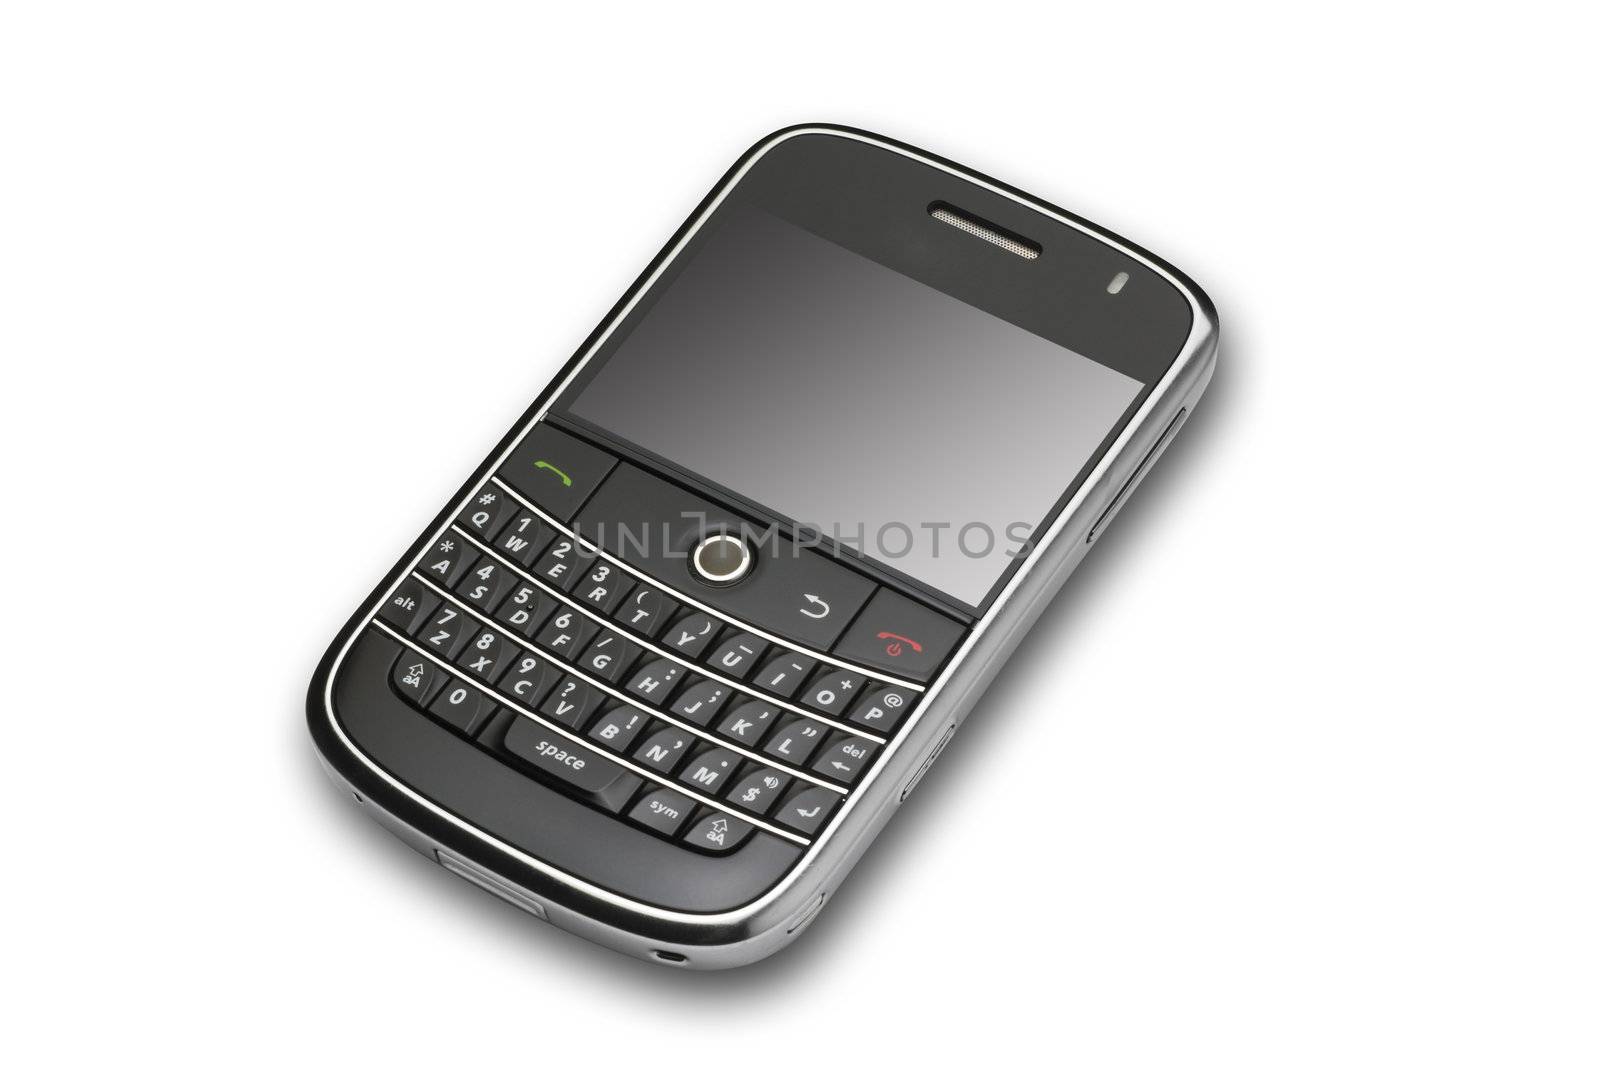 Blackberry on white, isolated with shadow and clipping path